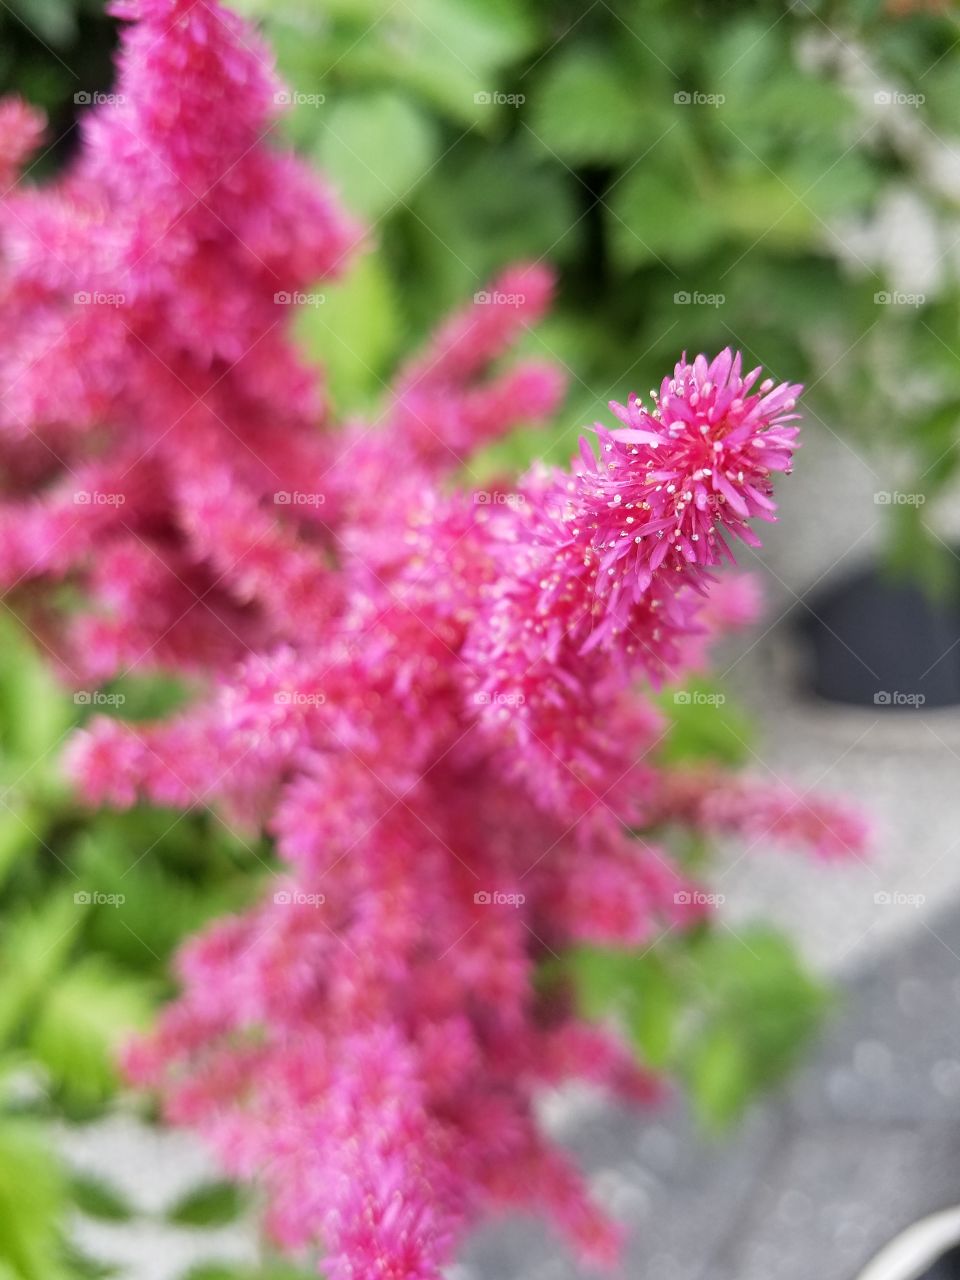 Pink flower with blurred background.